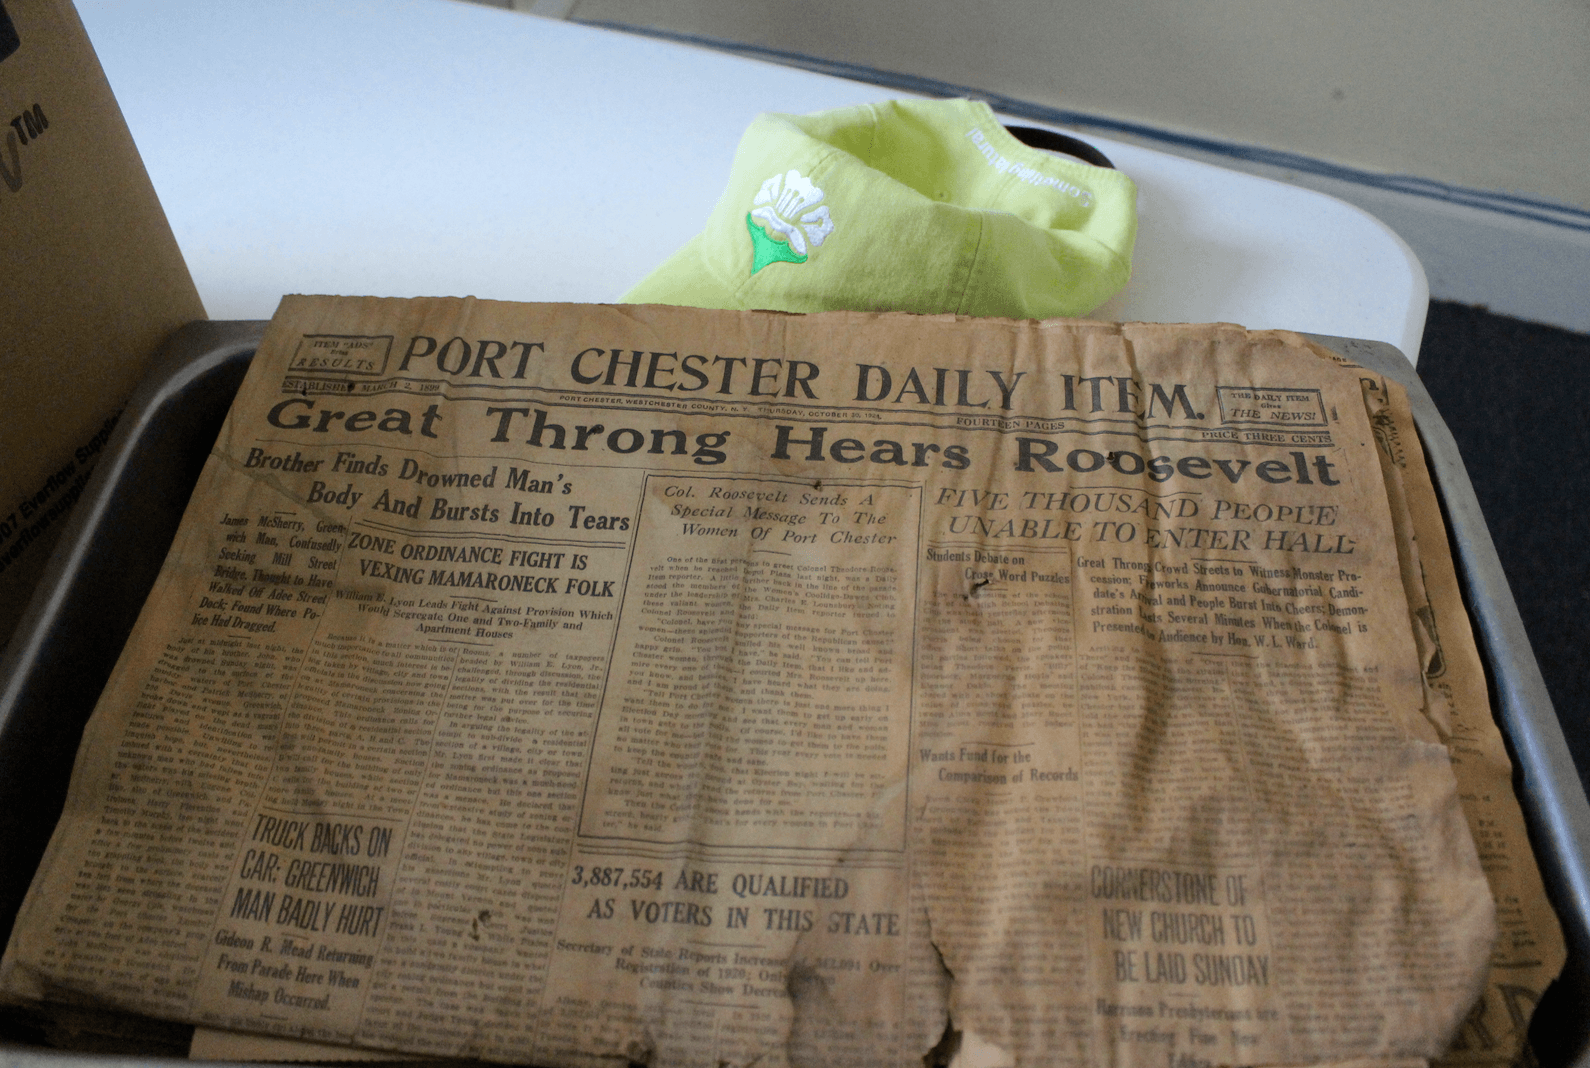 Port Chester Daily Item was used as insulation in the walls at the former carriage house at 189 Greenwich Ave. Photo: Leslie Yager